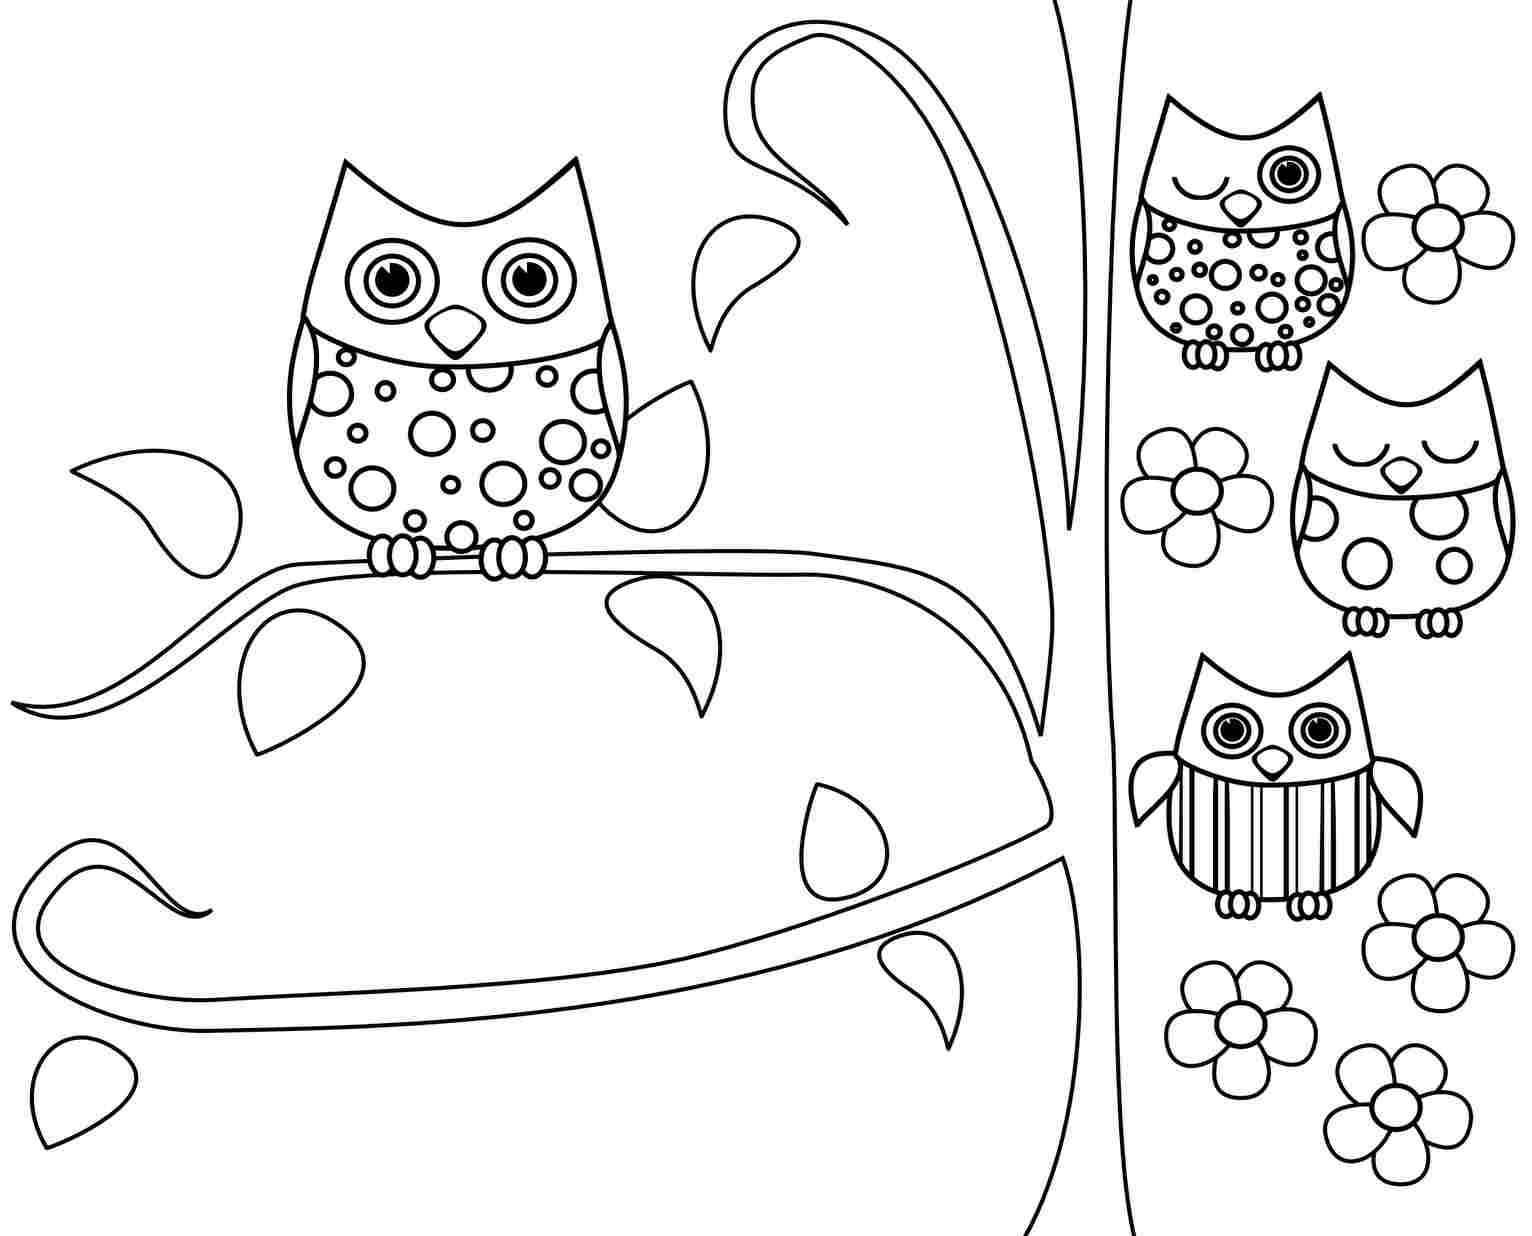 Cute Owl Printable Coloring Pages Your Kiddos Will Love - Coloring ...